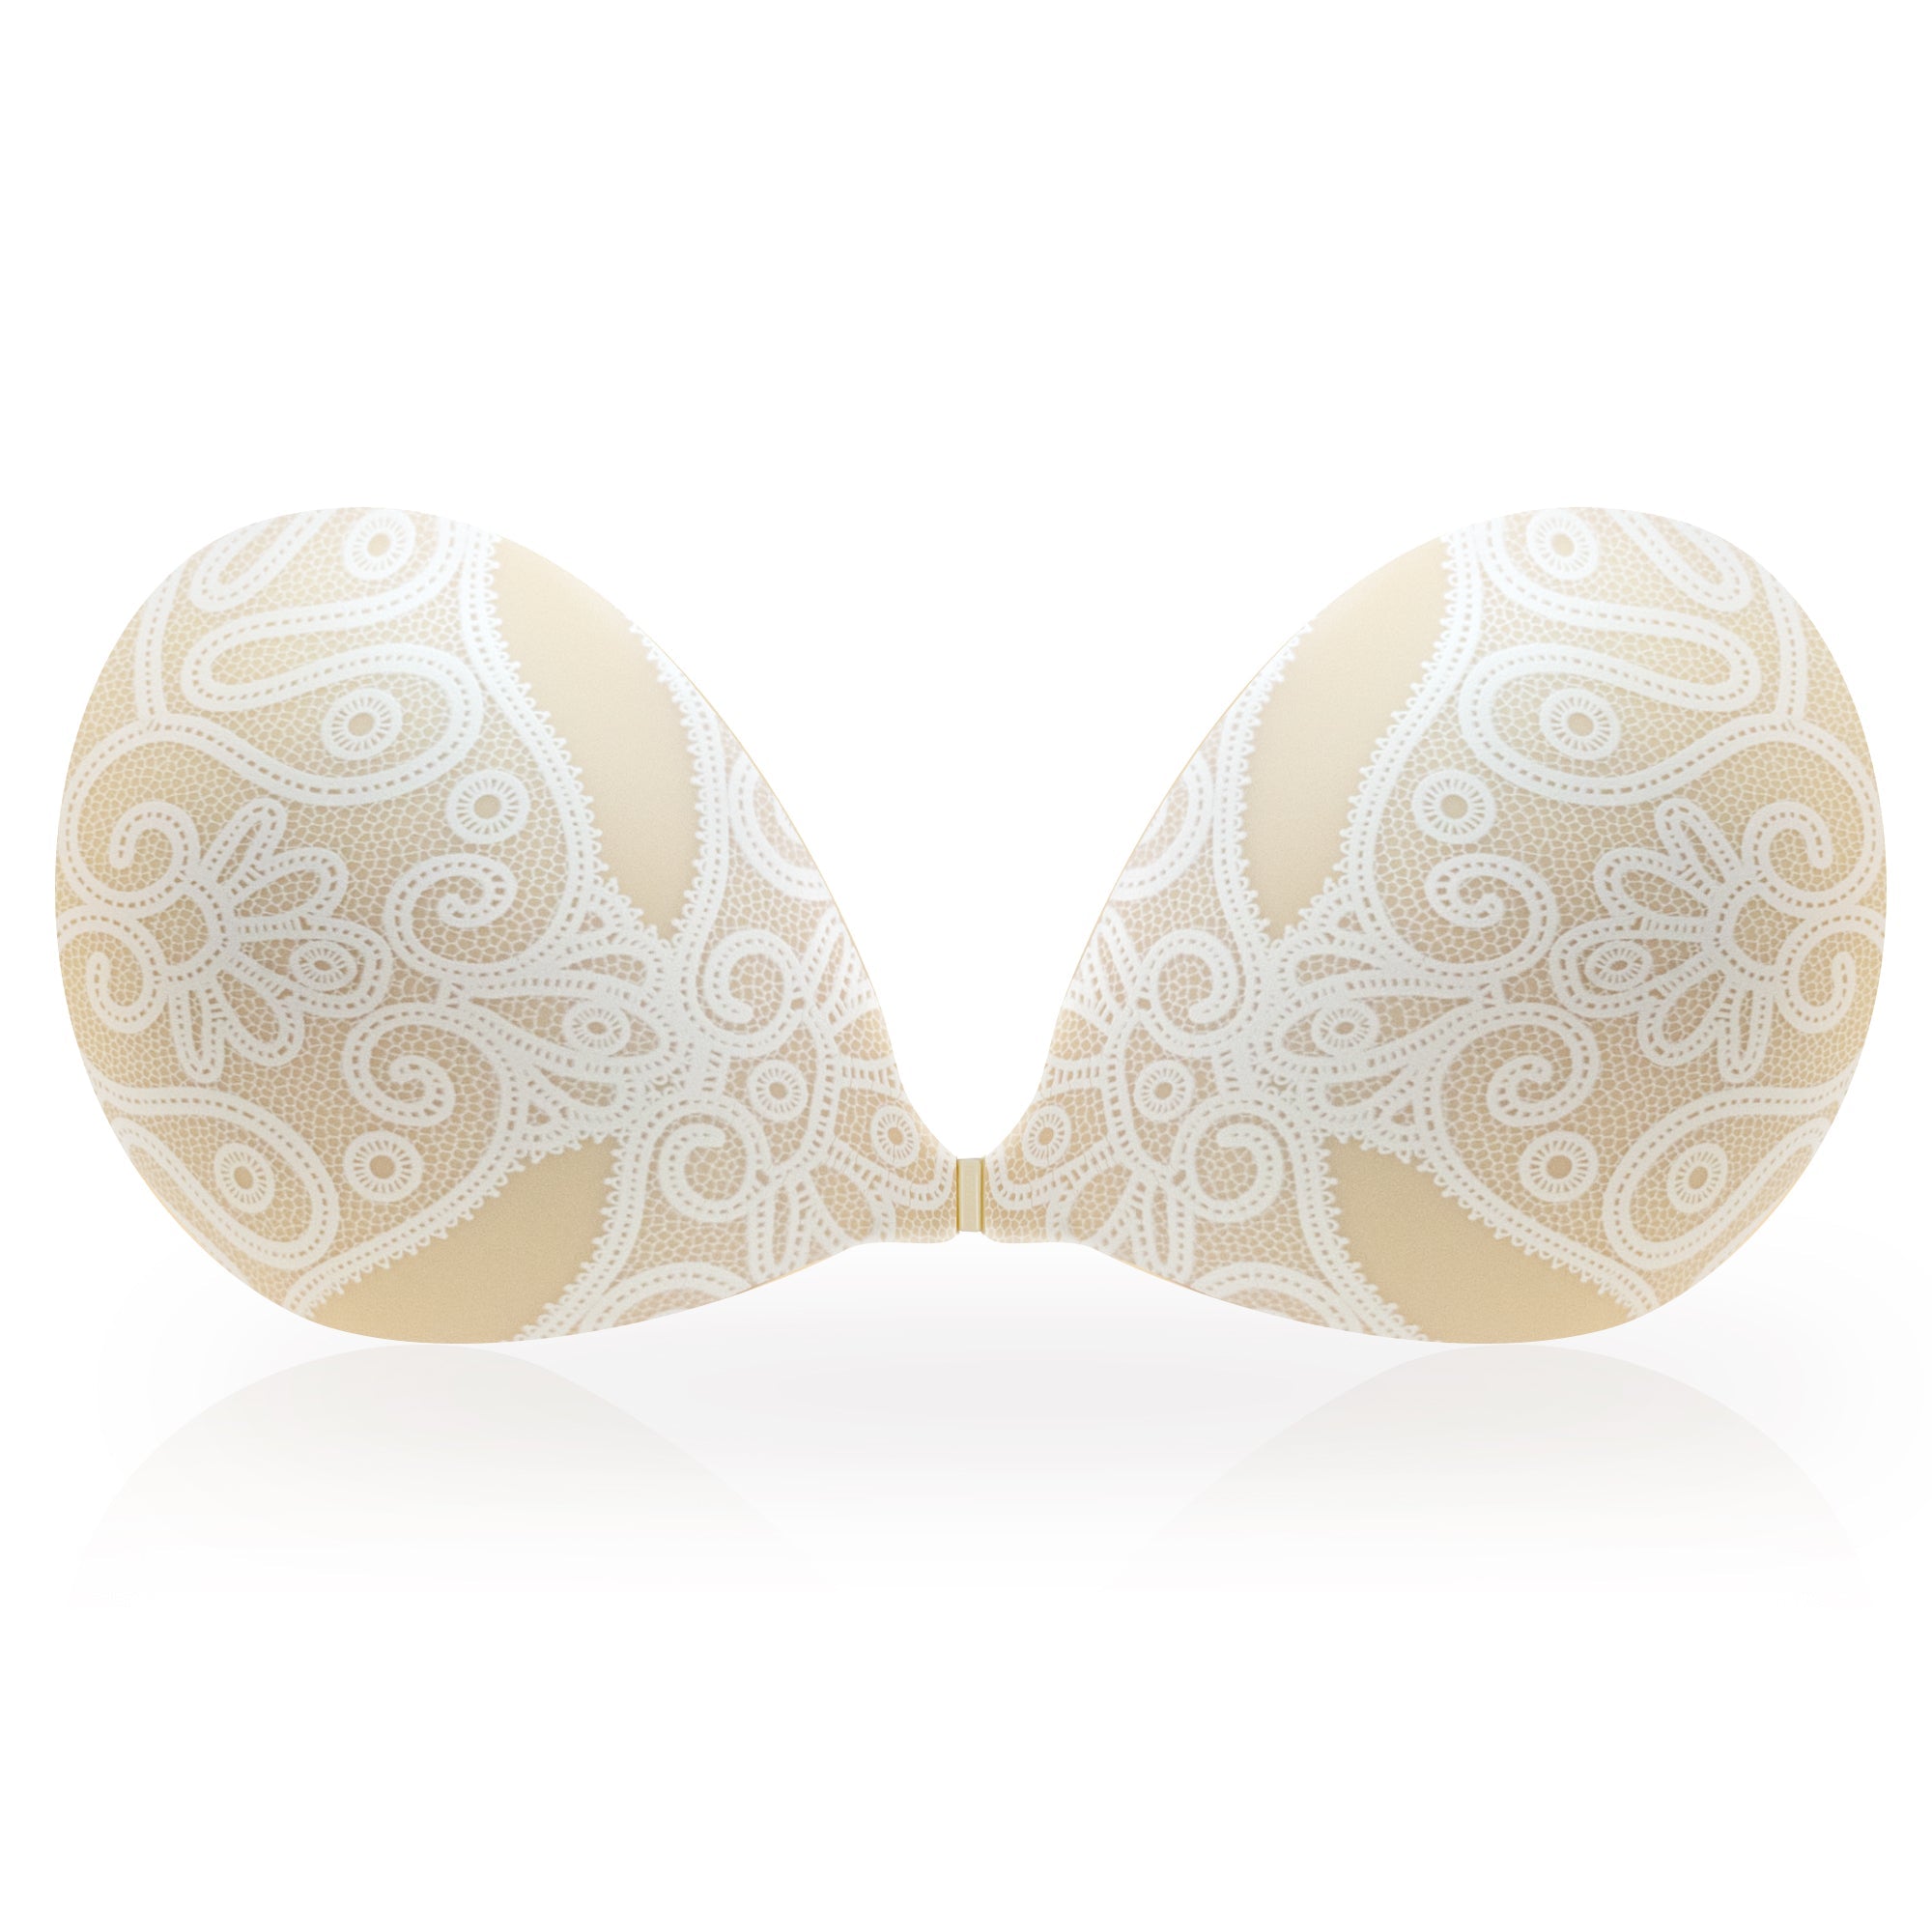 Buy Kiss & Tell Lifting and Push Up Nubra Stick On Bra in Nude Online